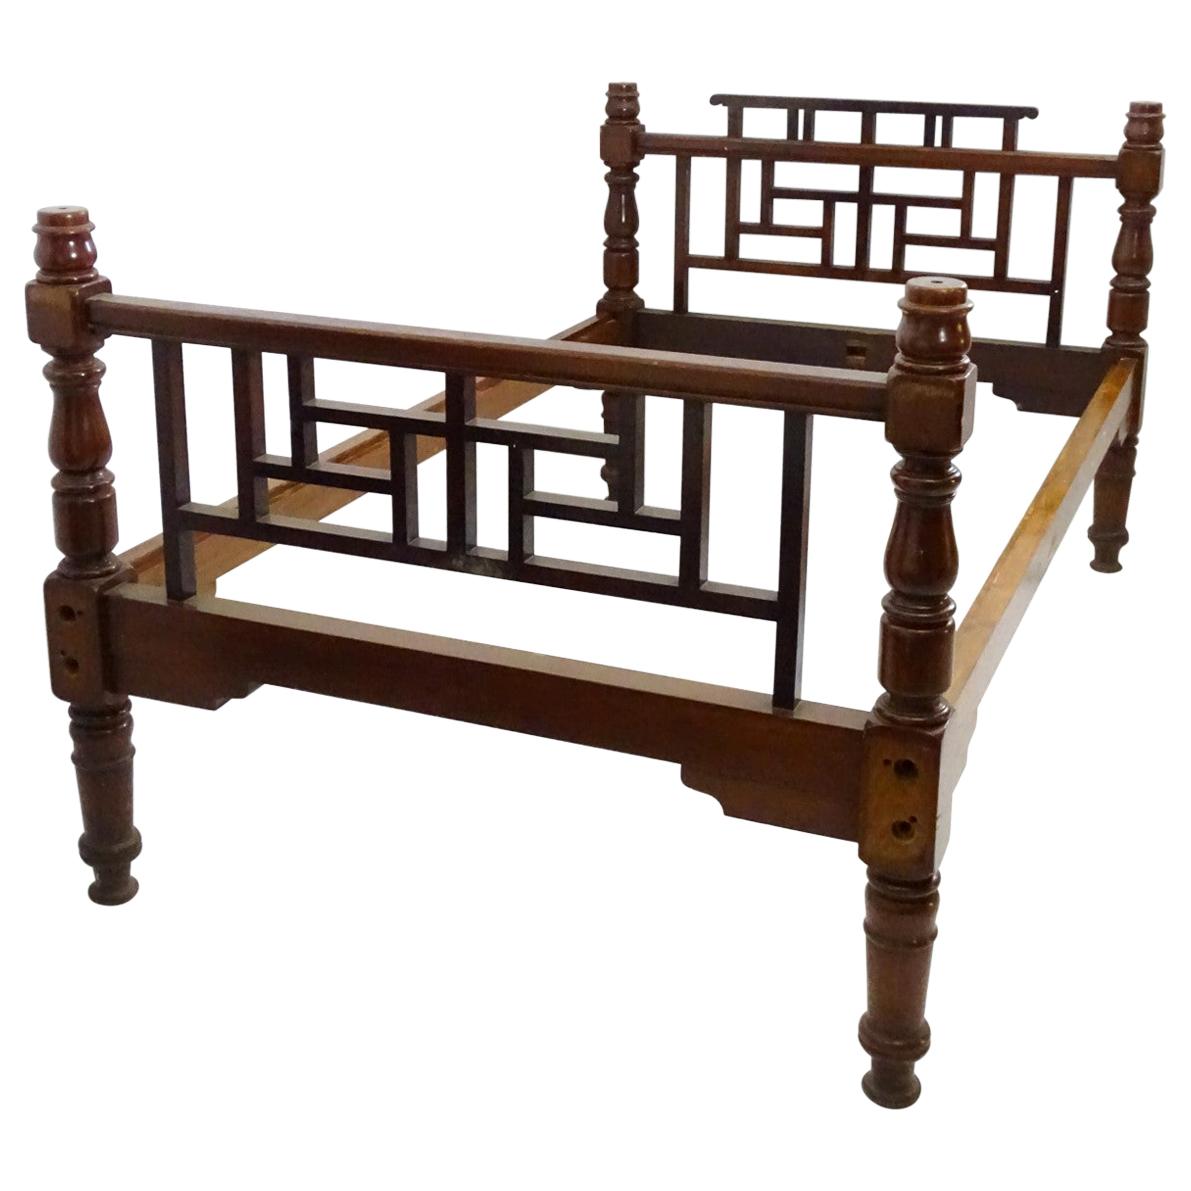 E W Godwin Style Rare Anglo-Japanese Walnut Double Bed with Lattice Work Details